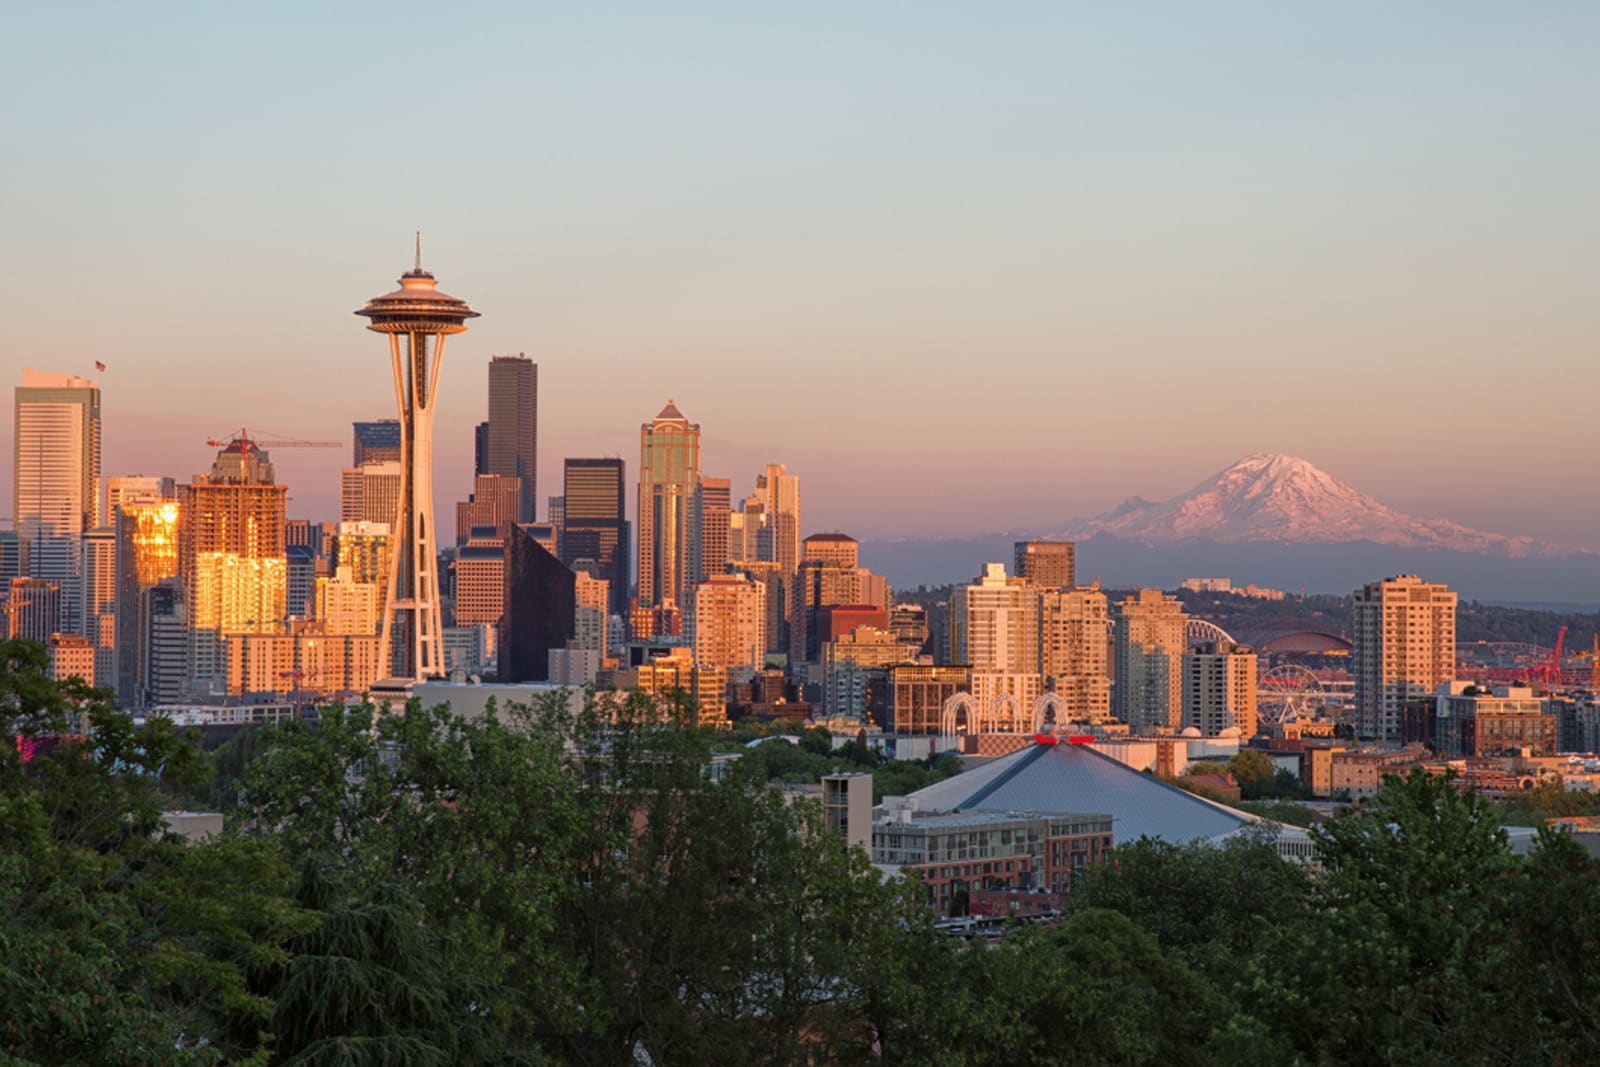 Seattle, Washington is surrounded by mountains and forests